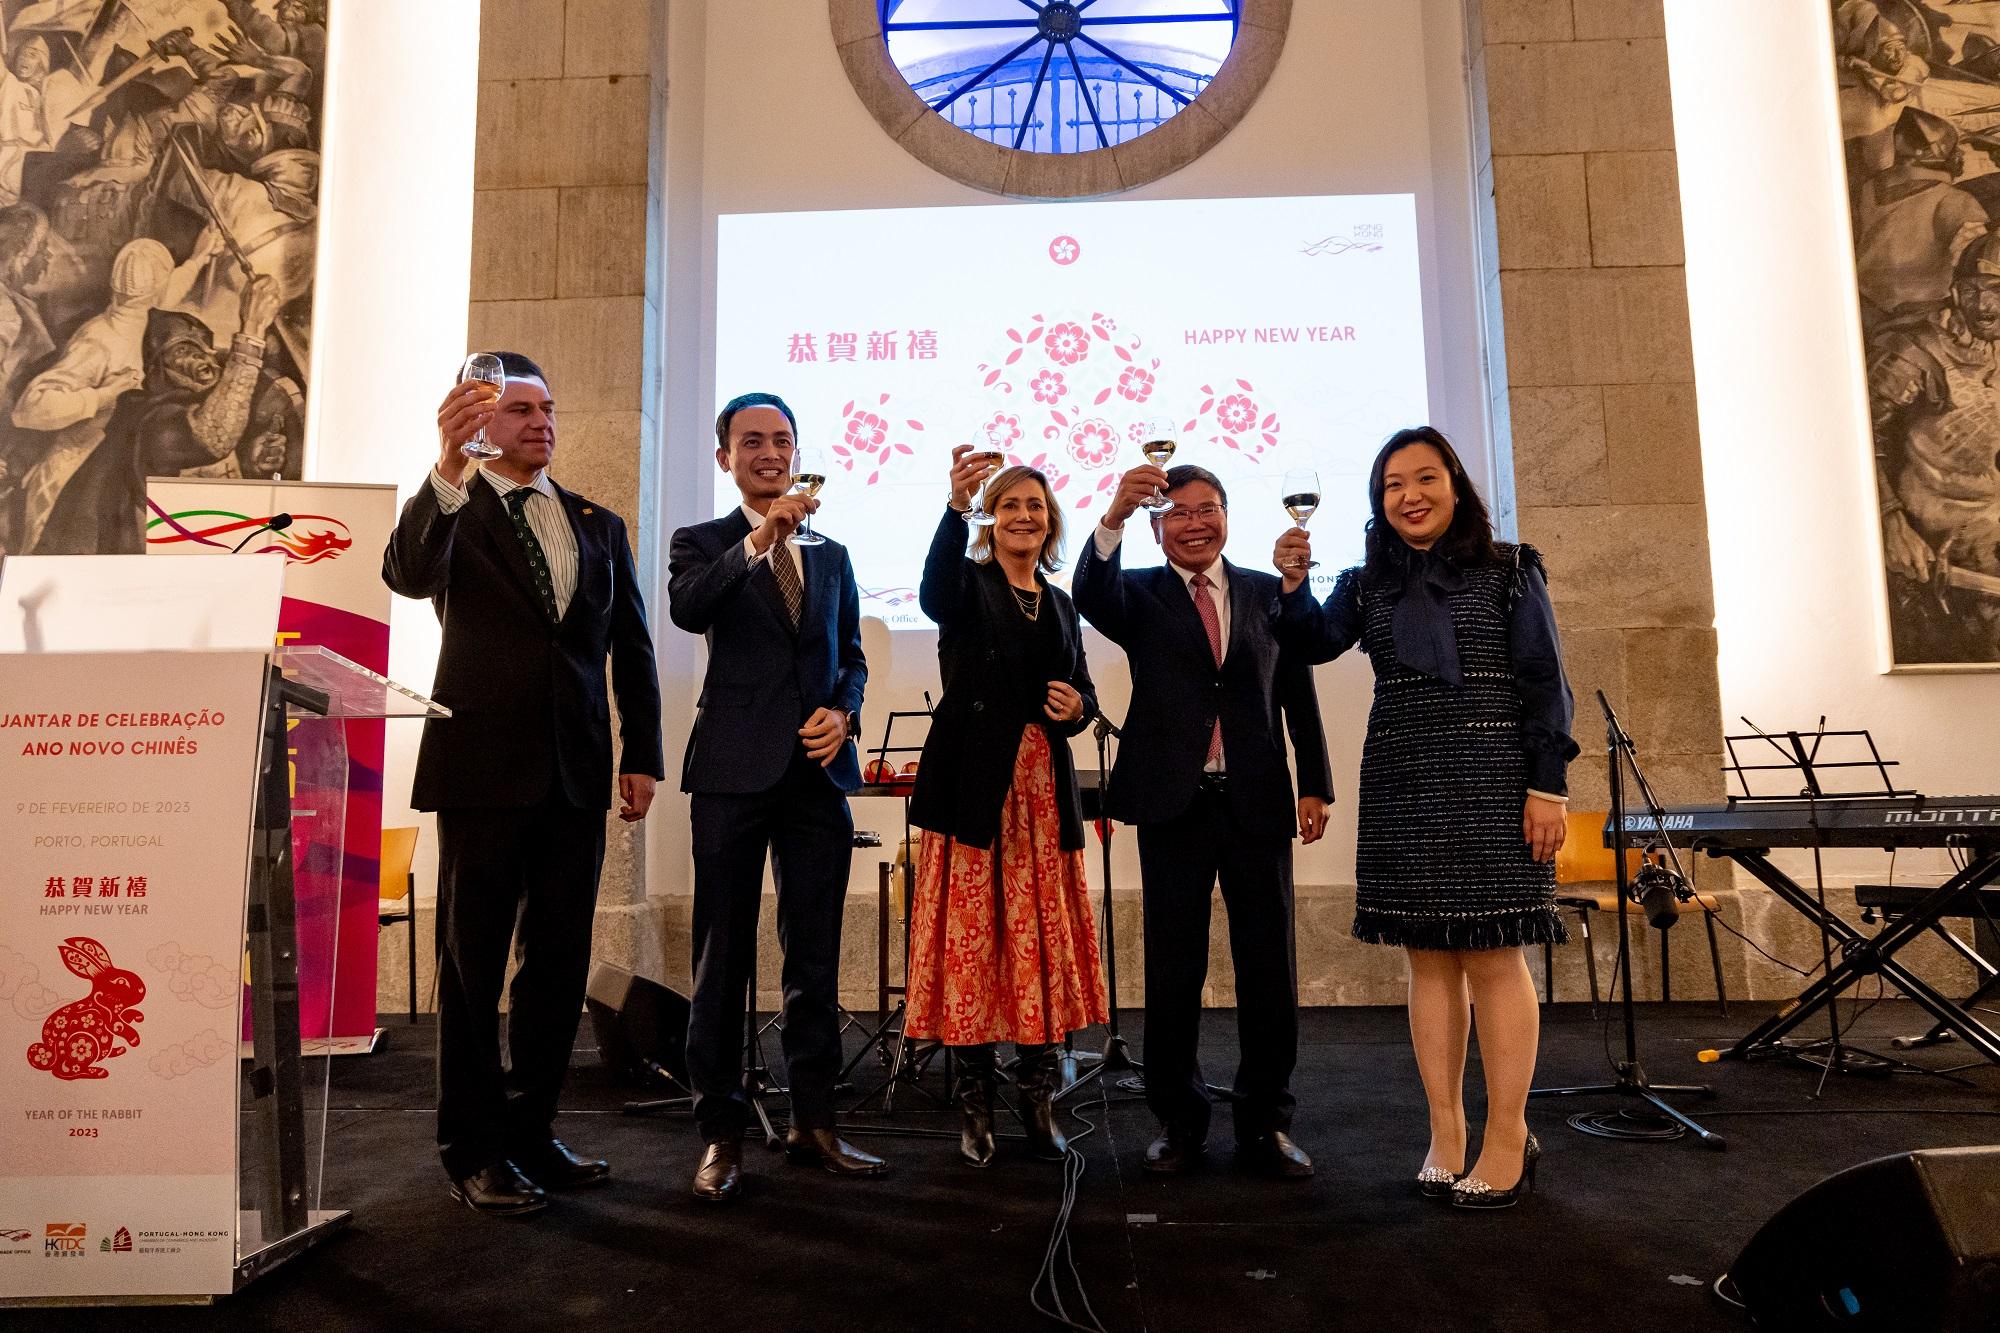 The Hong Kong Economic and Trade Office in Brussels organised a Chinese New Year reception in Porto on February 9 (Porto time). Photo shows (from left) the President of the Portugal-Hong Kong Chamber of Commerce and Industry, Mr Bernardo Mendia; the Director for France, Spain and Portugal of the Hong Kong Trade Development Council, Mr Chris Lo; Porto City Councillor for Tourism and Internationalization Ms Catarina Santos Cunha; the Ambassador of the People's Republic of China to Portugal, Mr Zhao Bentang; and the Acting Special Representative for Hong Kong Economic and Trade Affairs to the European Union, Miss Grace Li, toasting at the reception.